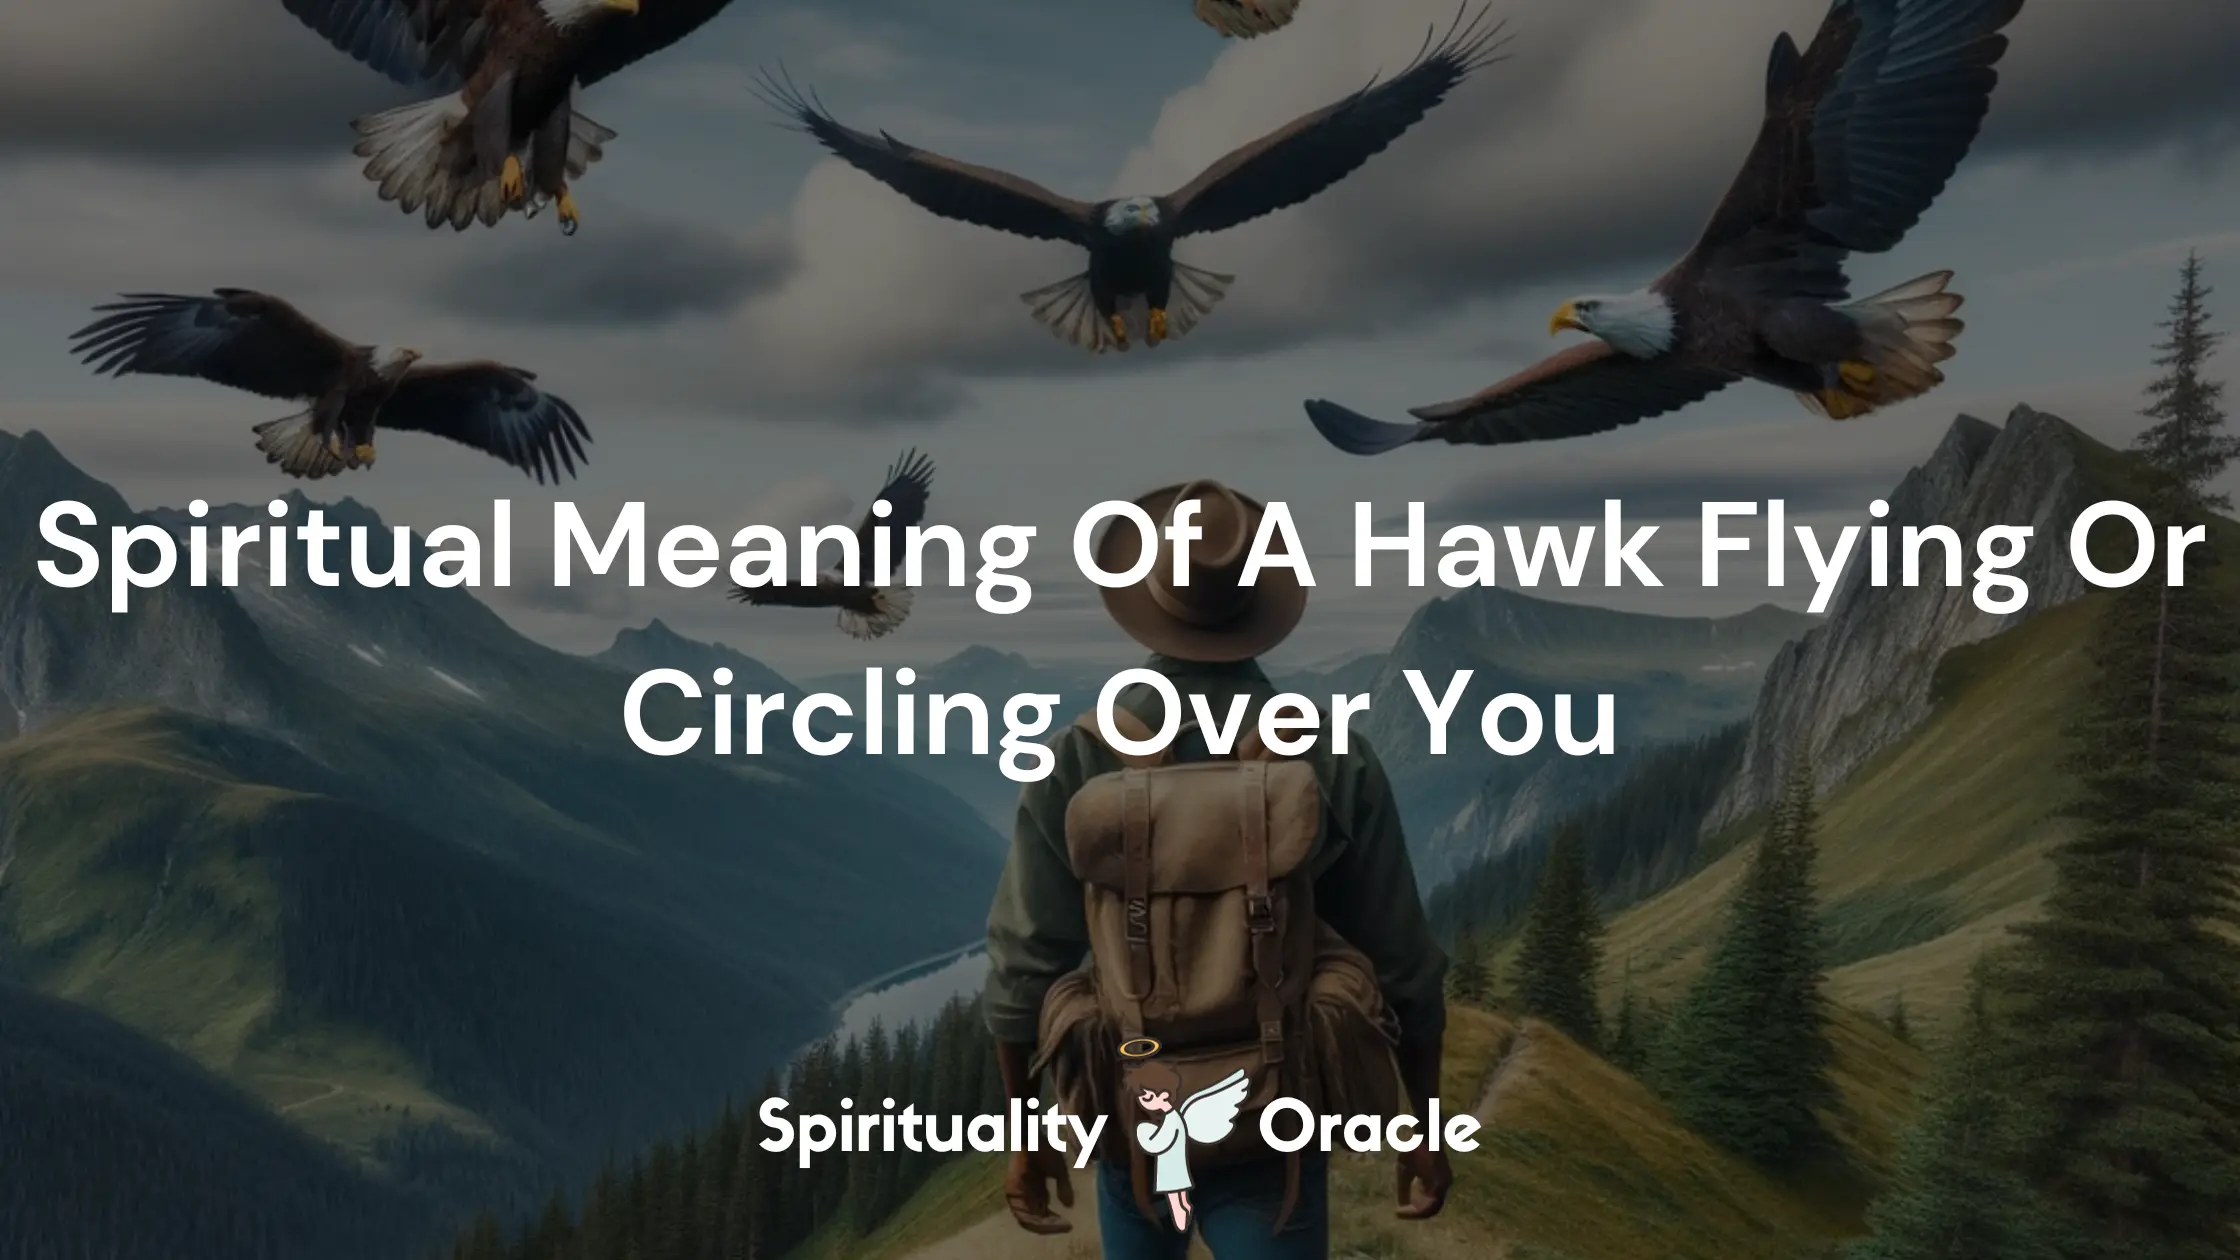 Spiritual Meaning Of A Hawk Flying Or Circling Over You